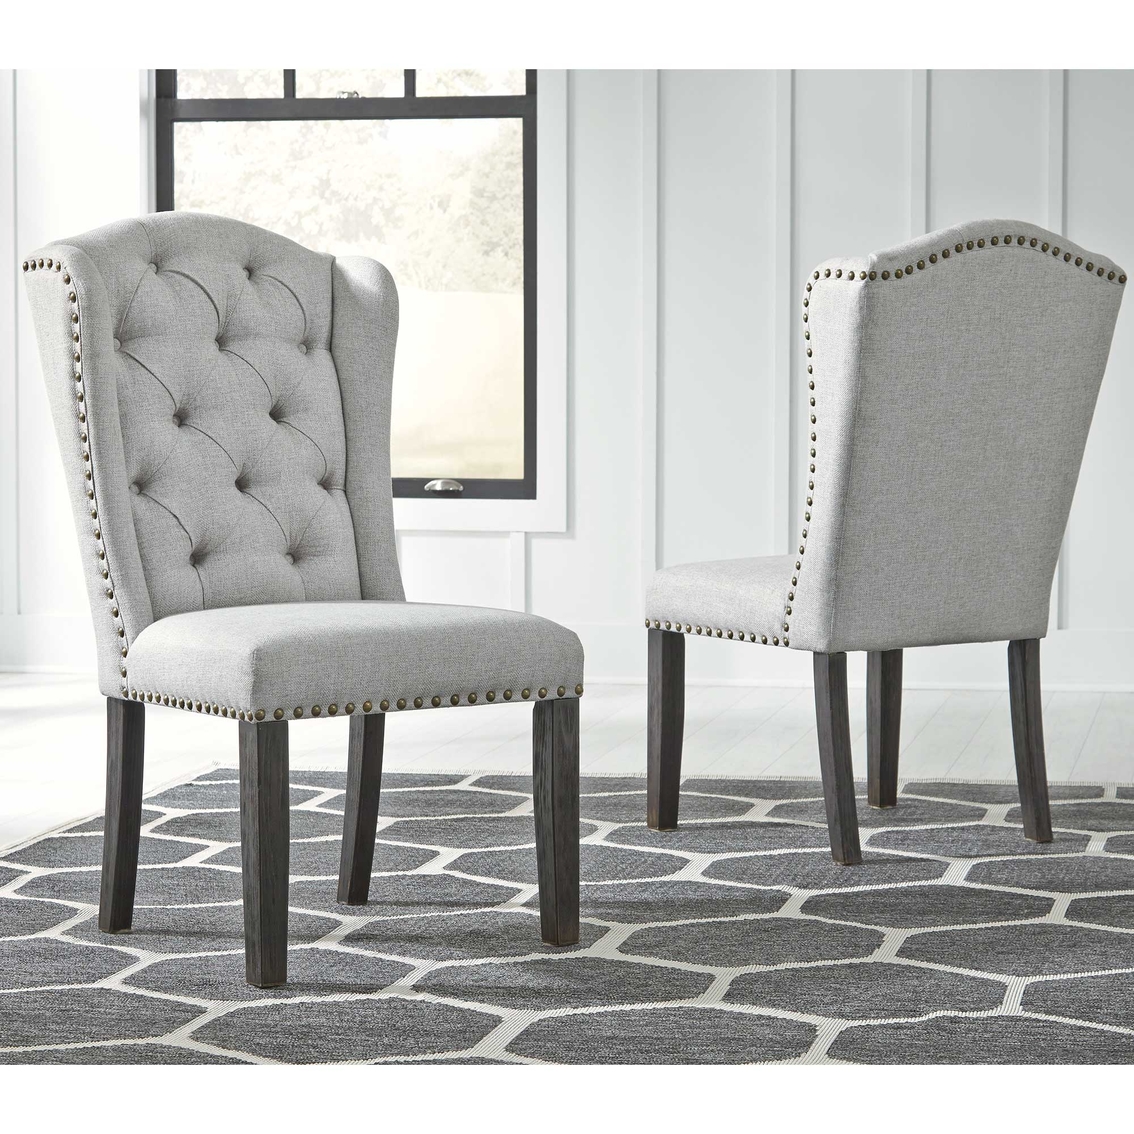 Signature Design by Ashley Jeanette Collection Dining Room Side Chair 2 pk. - Image 2 of 5